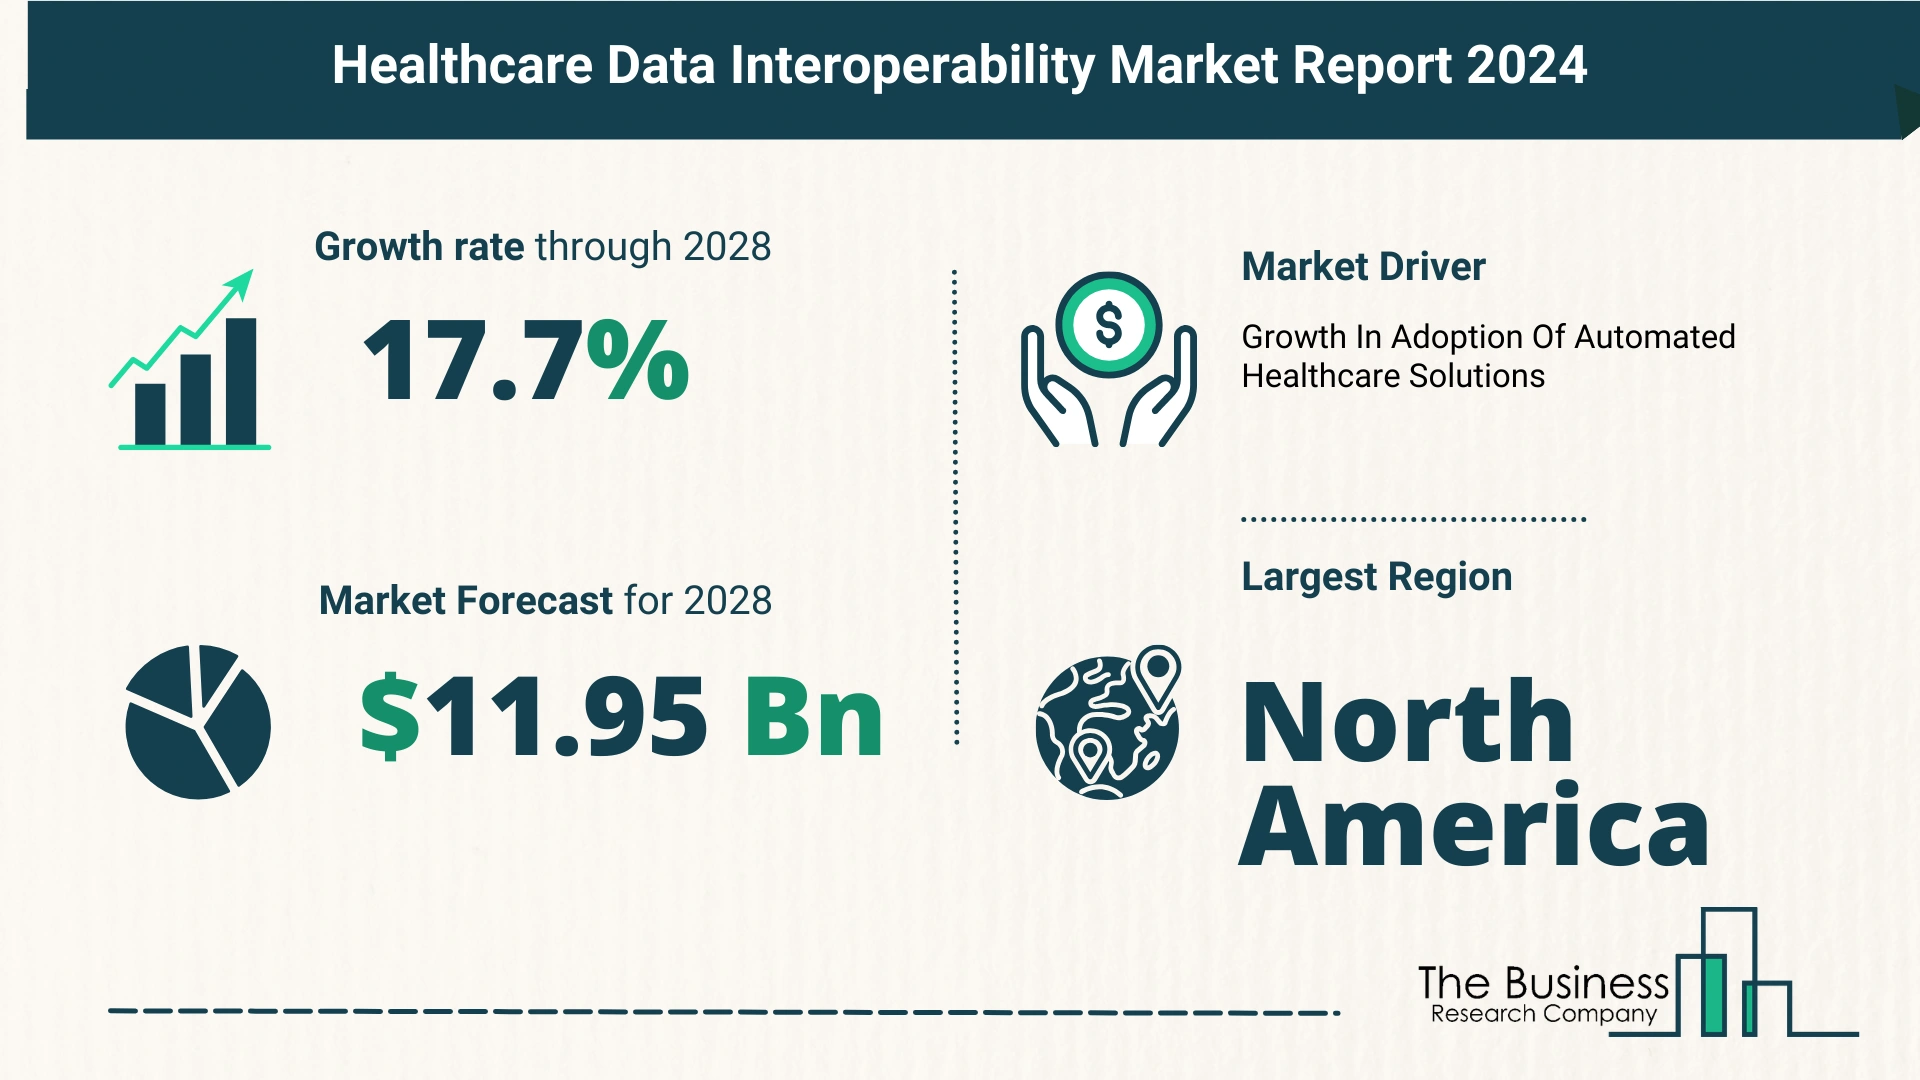 Key Trends And Drivers In The Healthcare Data Interoperability Market 2024